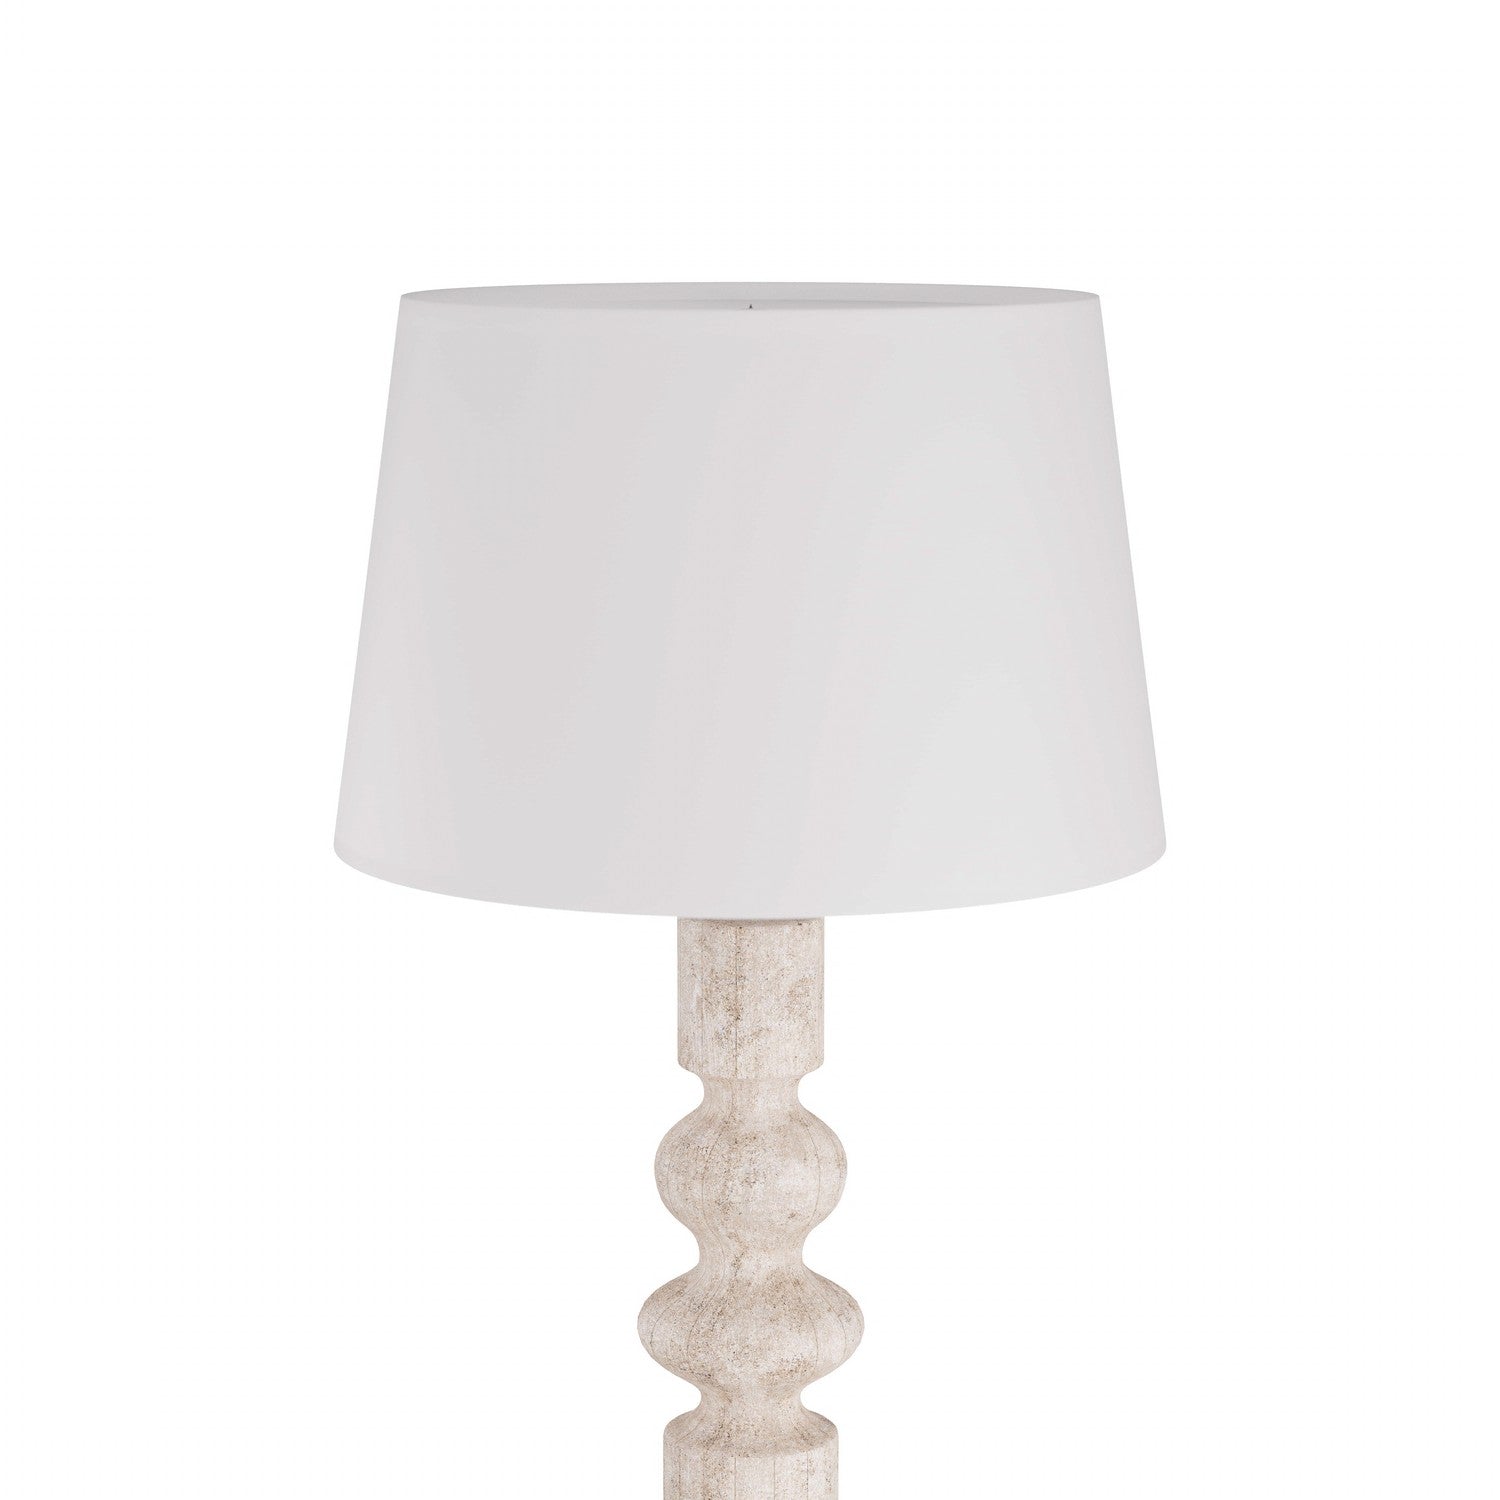 One Light Floor Lamp from the Woodrow collection in Limewash finish